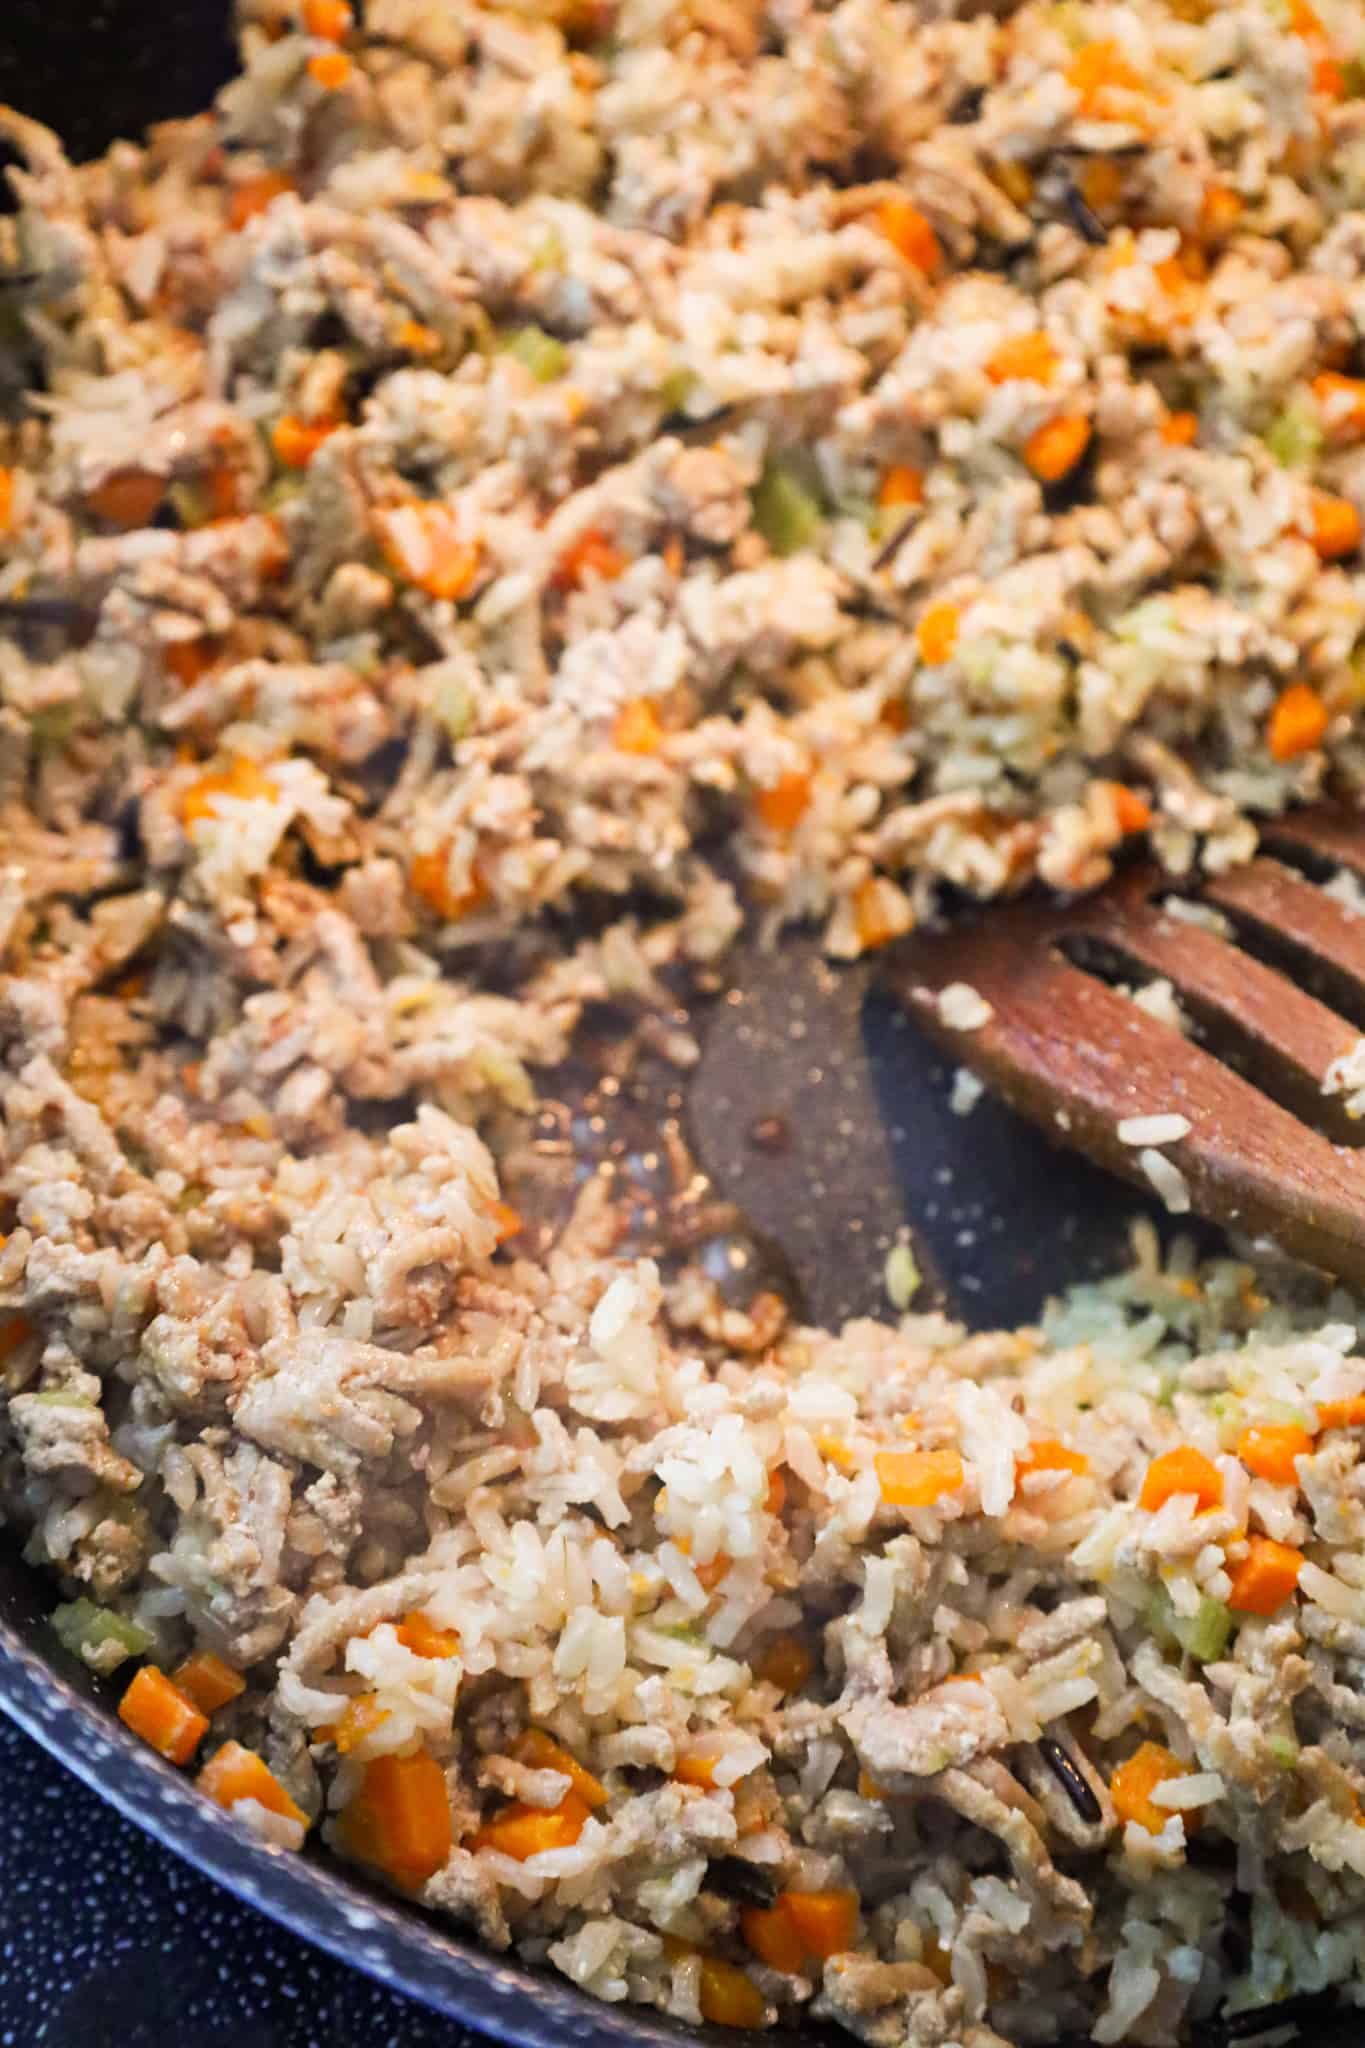 soy sauce added to ground turkey and rice skillet